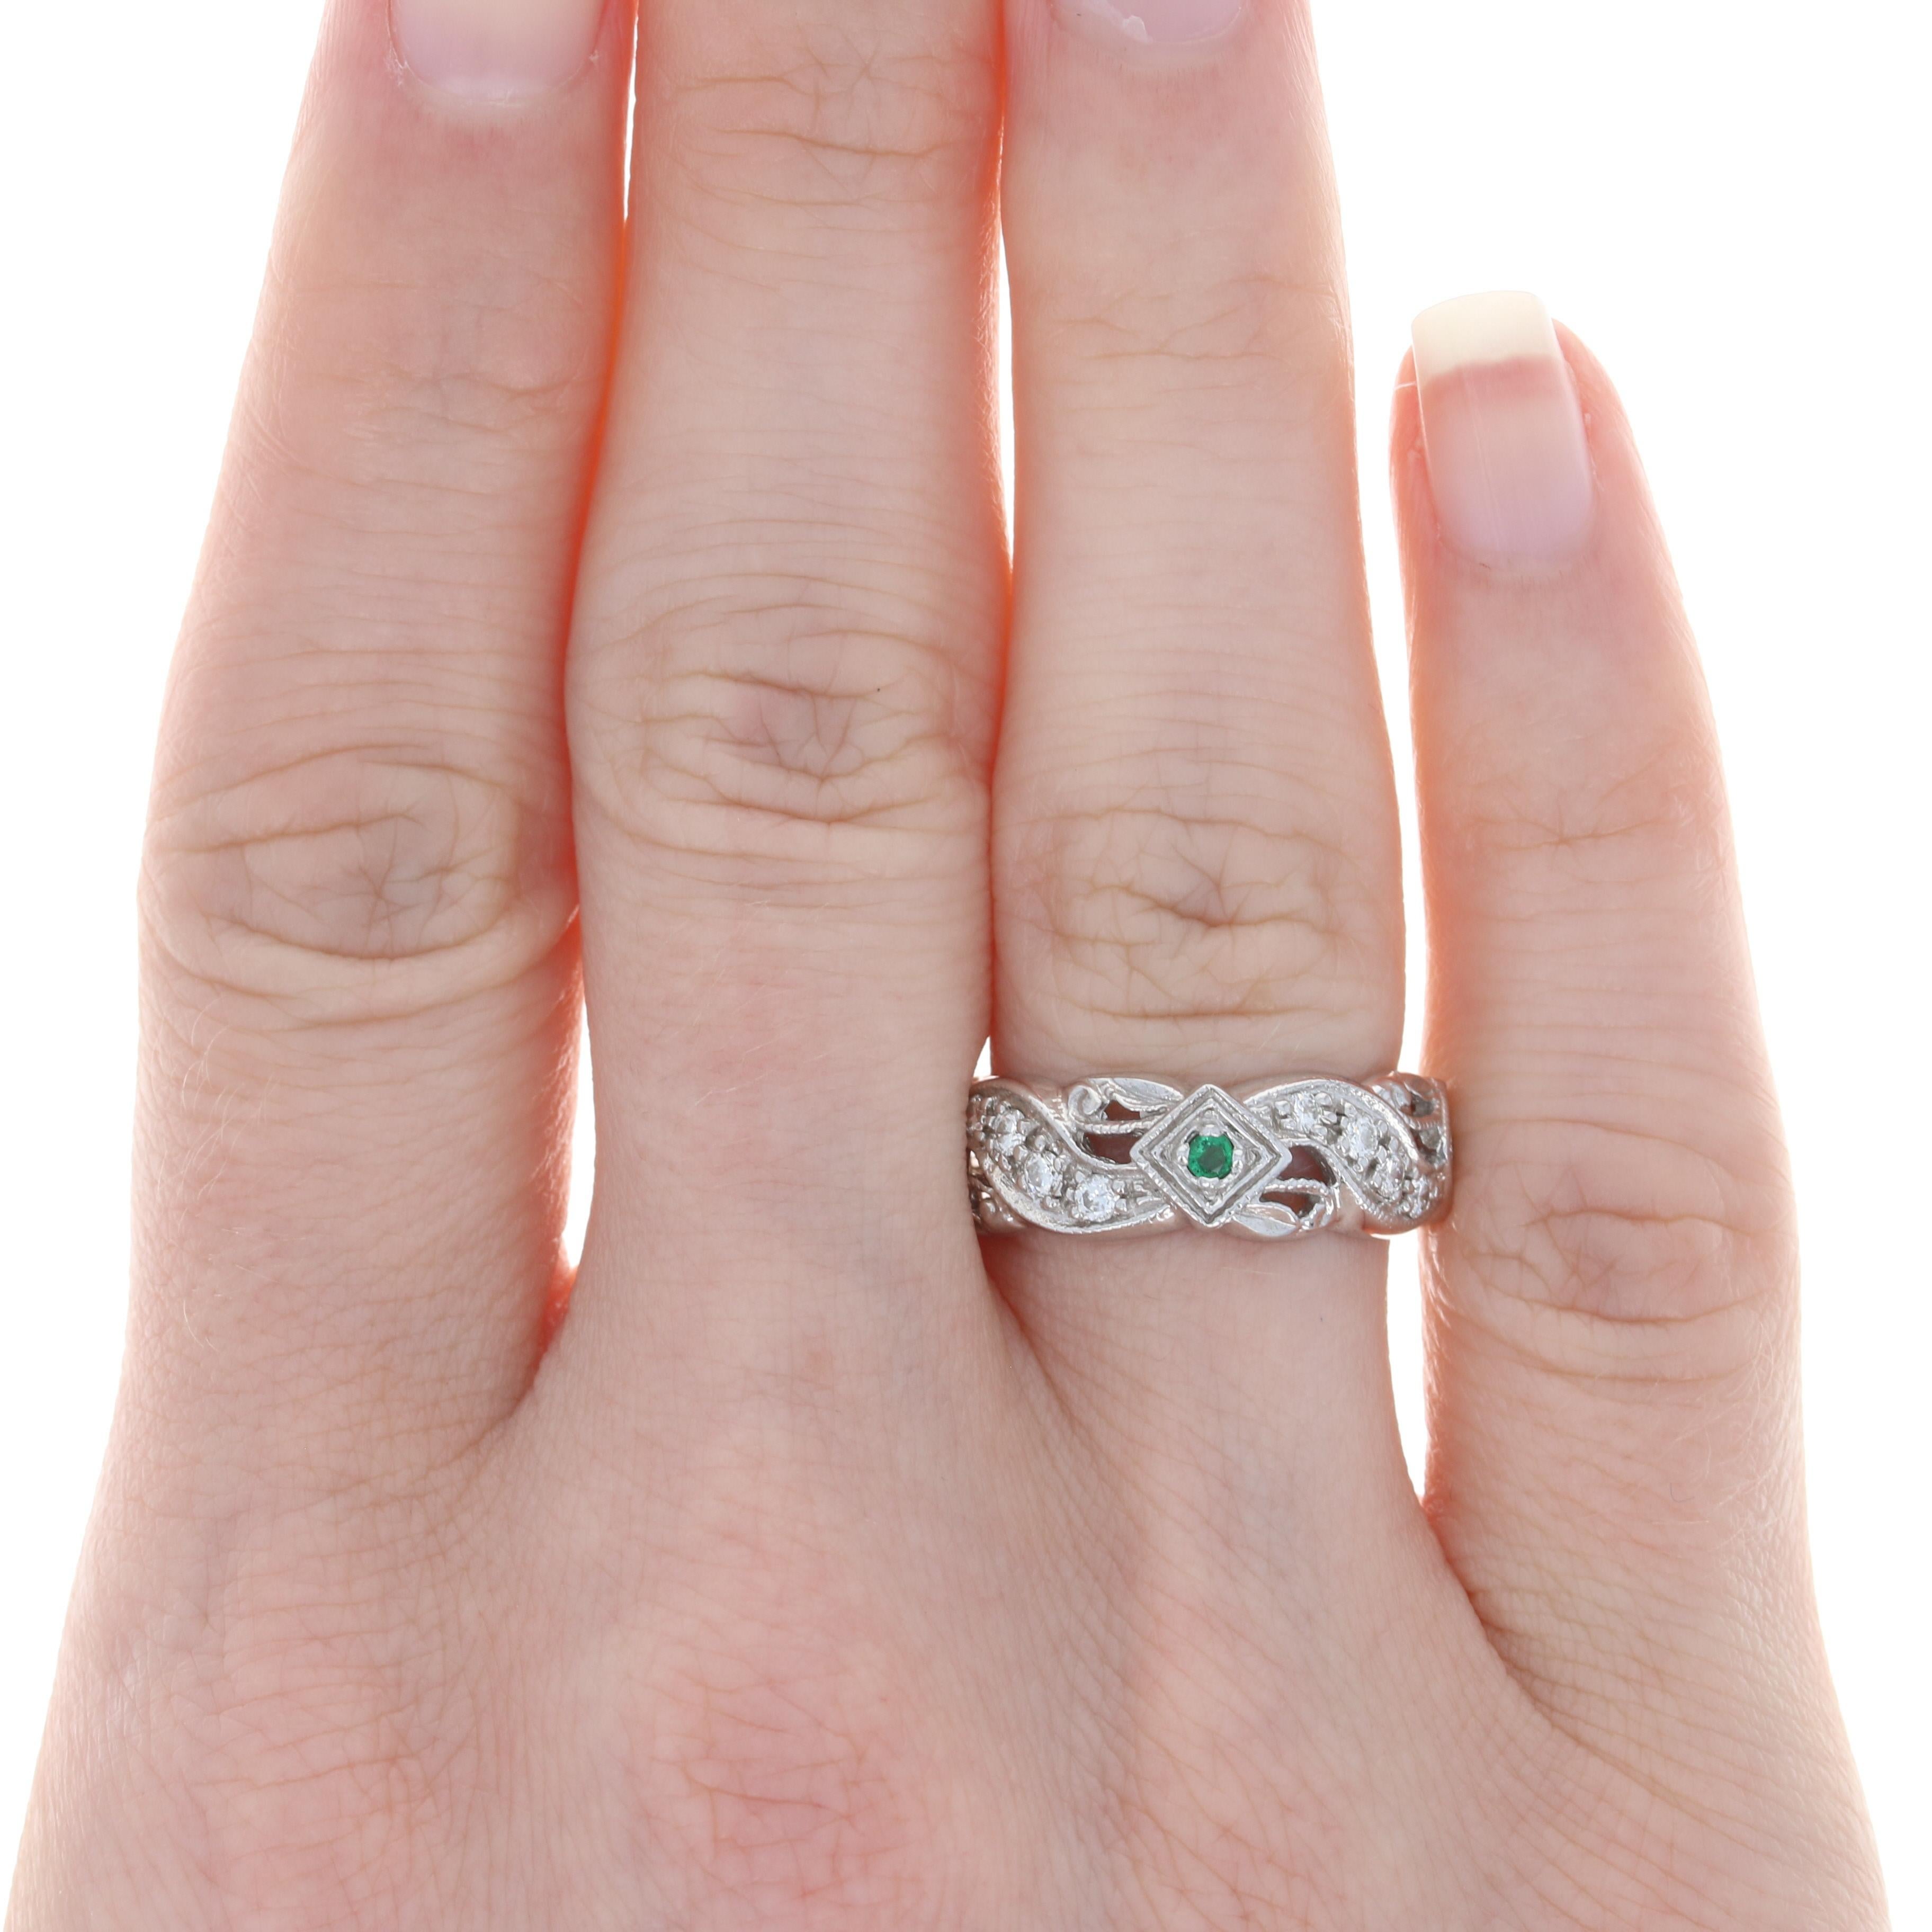 On a special night out, get ready to dazzle wearing this gorgeous diamond and emerald cocktail ring! Crafted in luxurious 18k white gold, this ring vintage-style is fashioned in a glorious eternity band style that showcases natural diamonds and